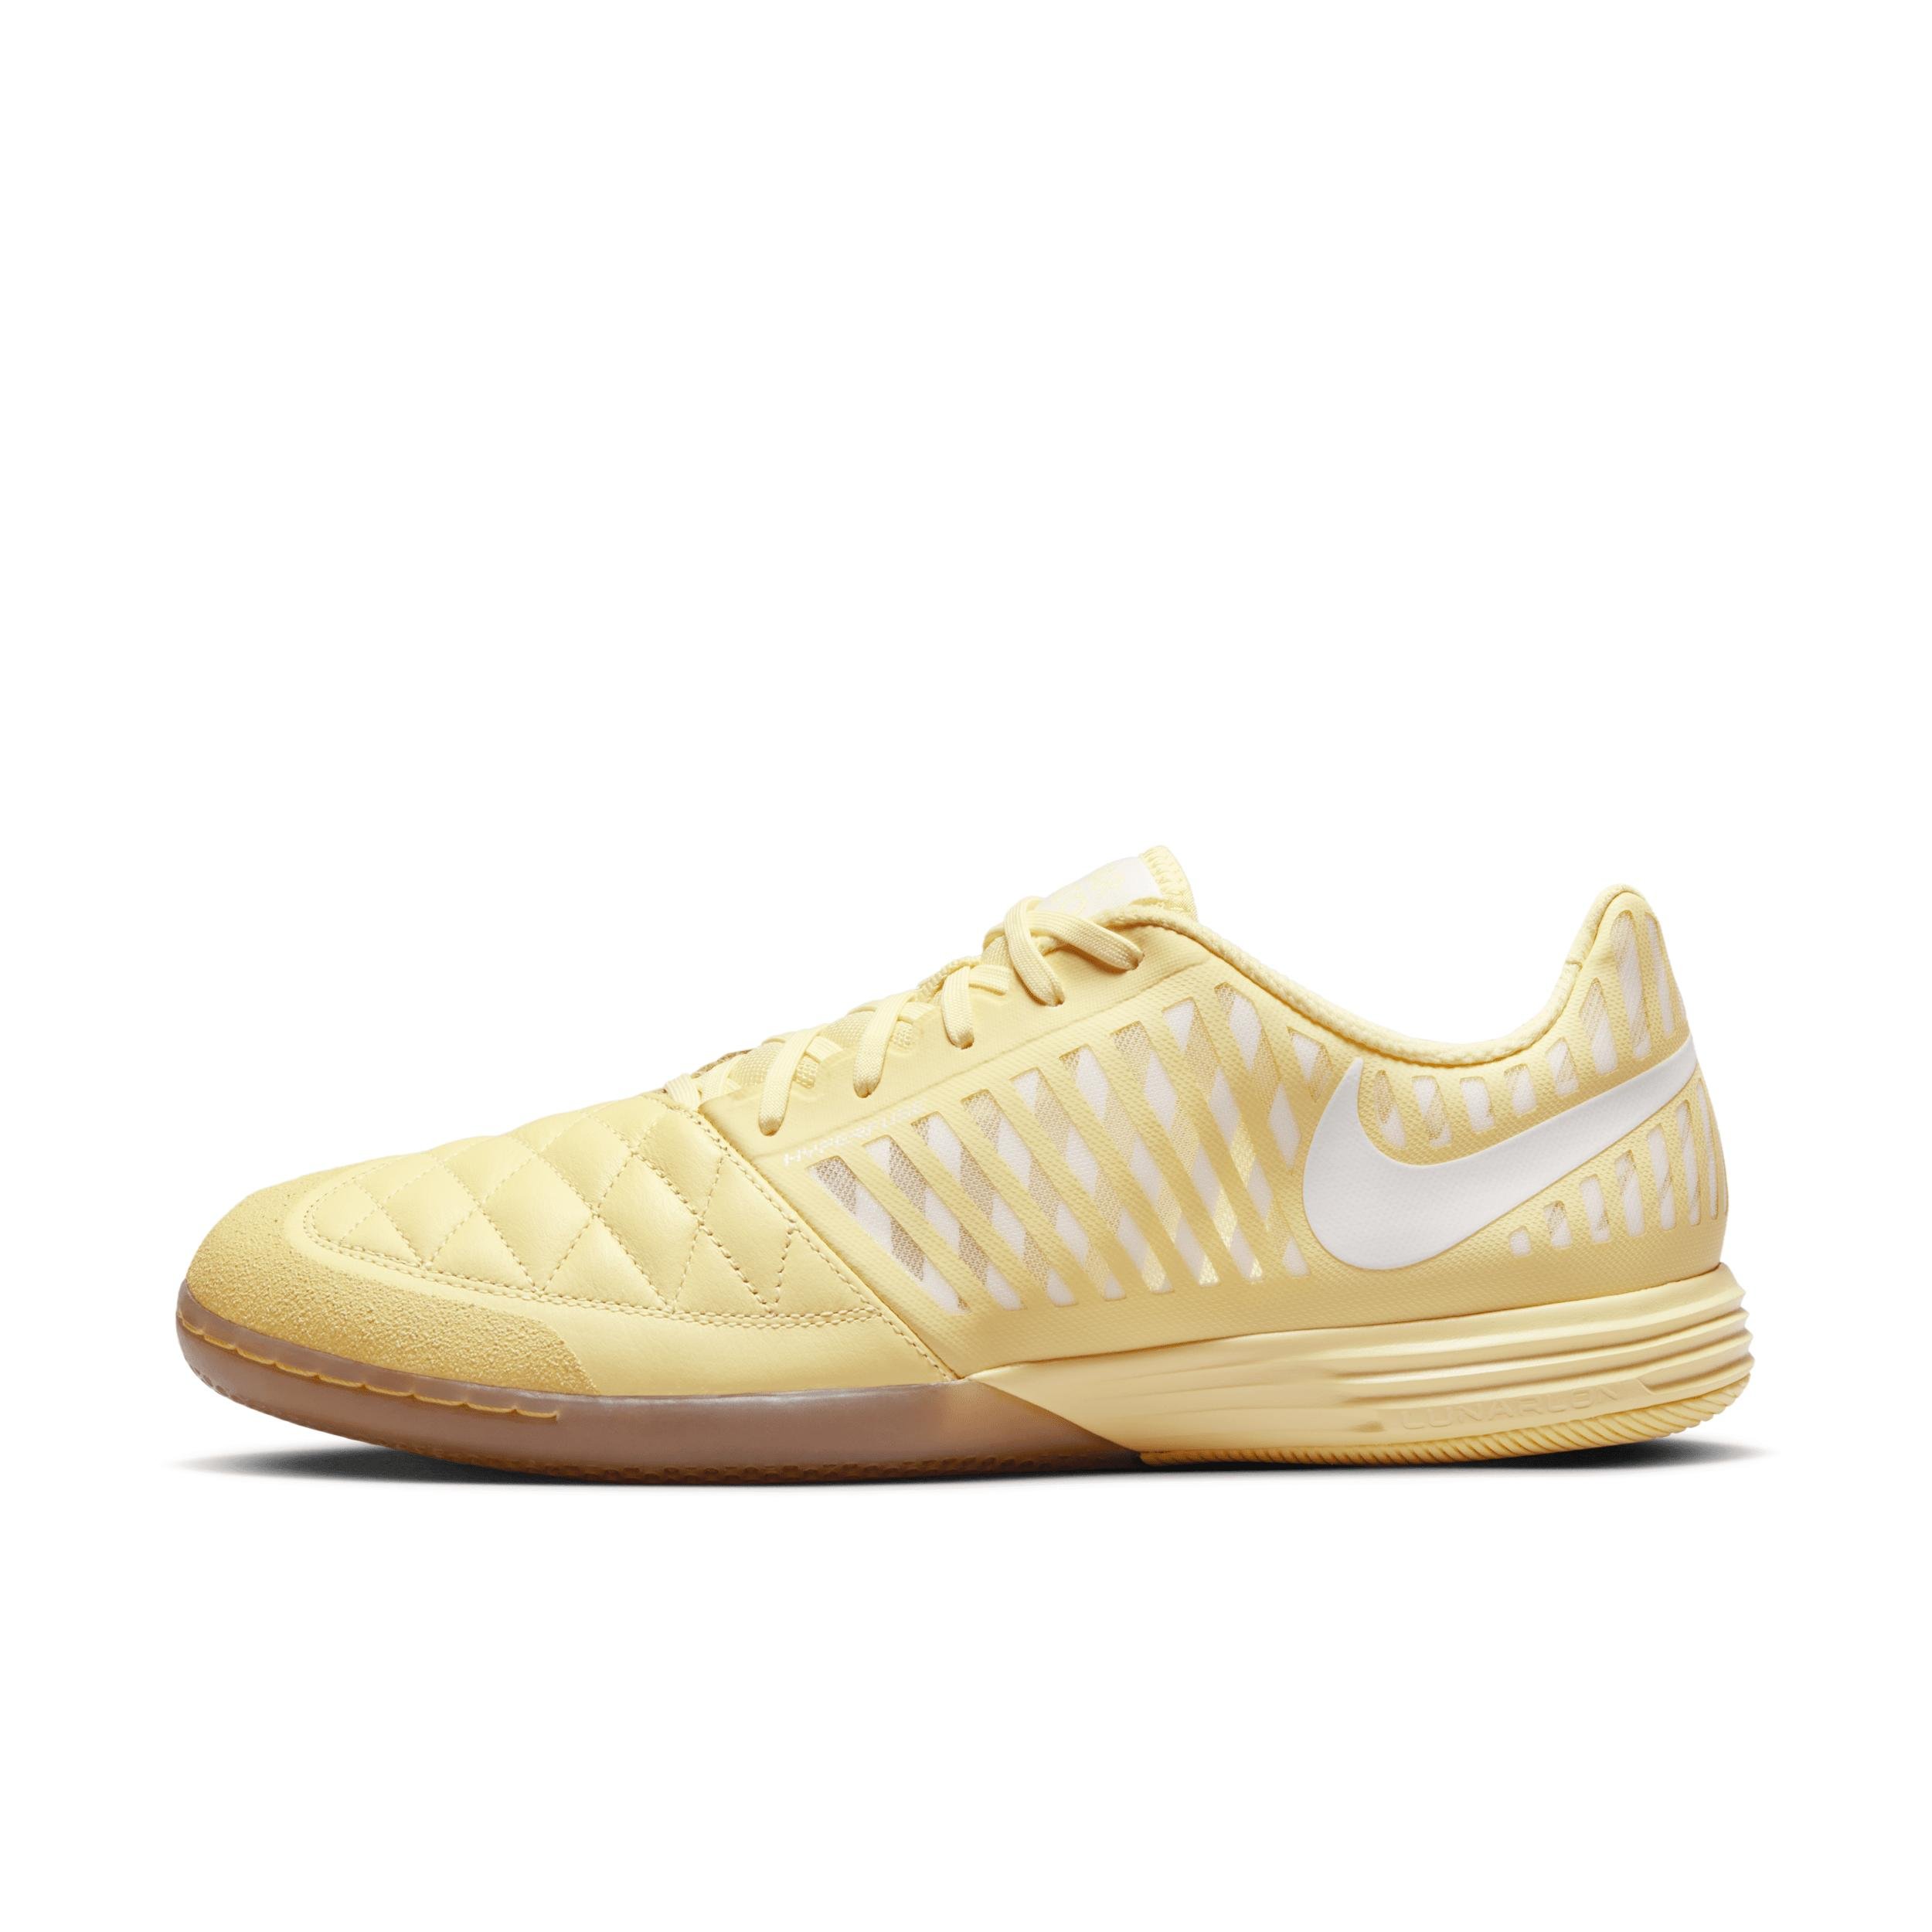 Nike Men's Lunargato II Indoor/Court Low-Top Soccer Shoes by NIKE